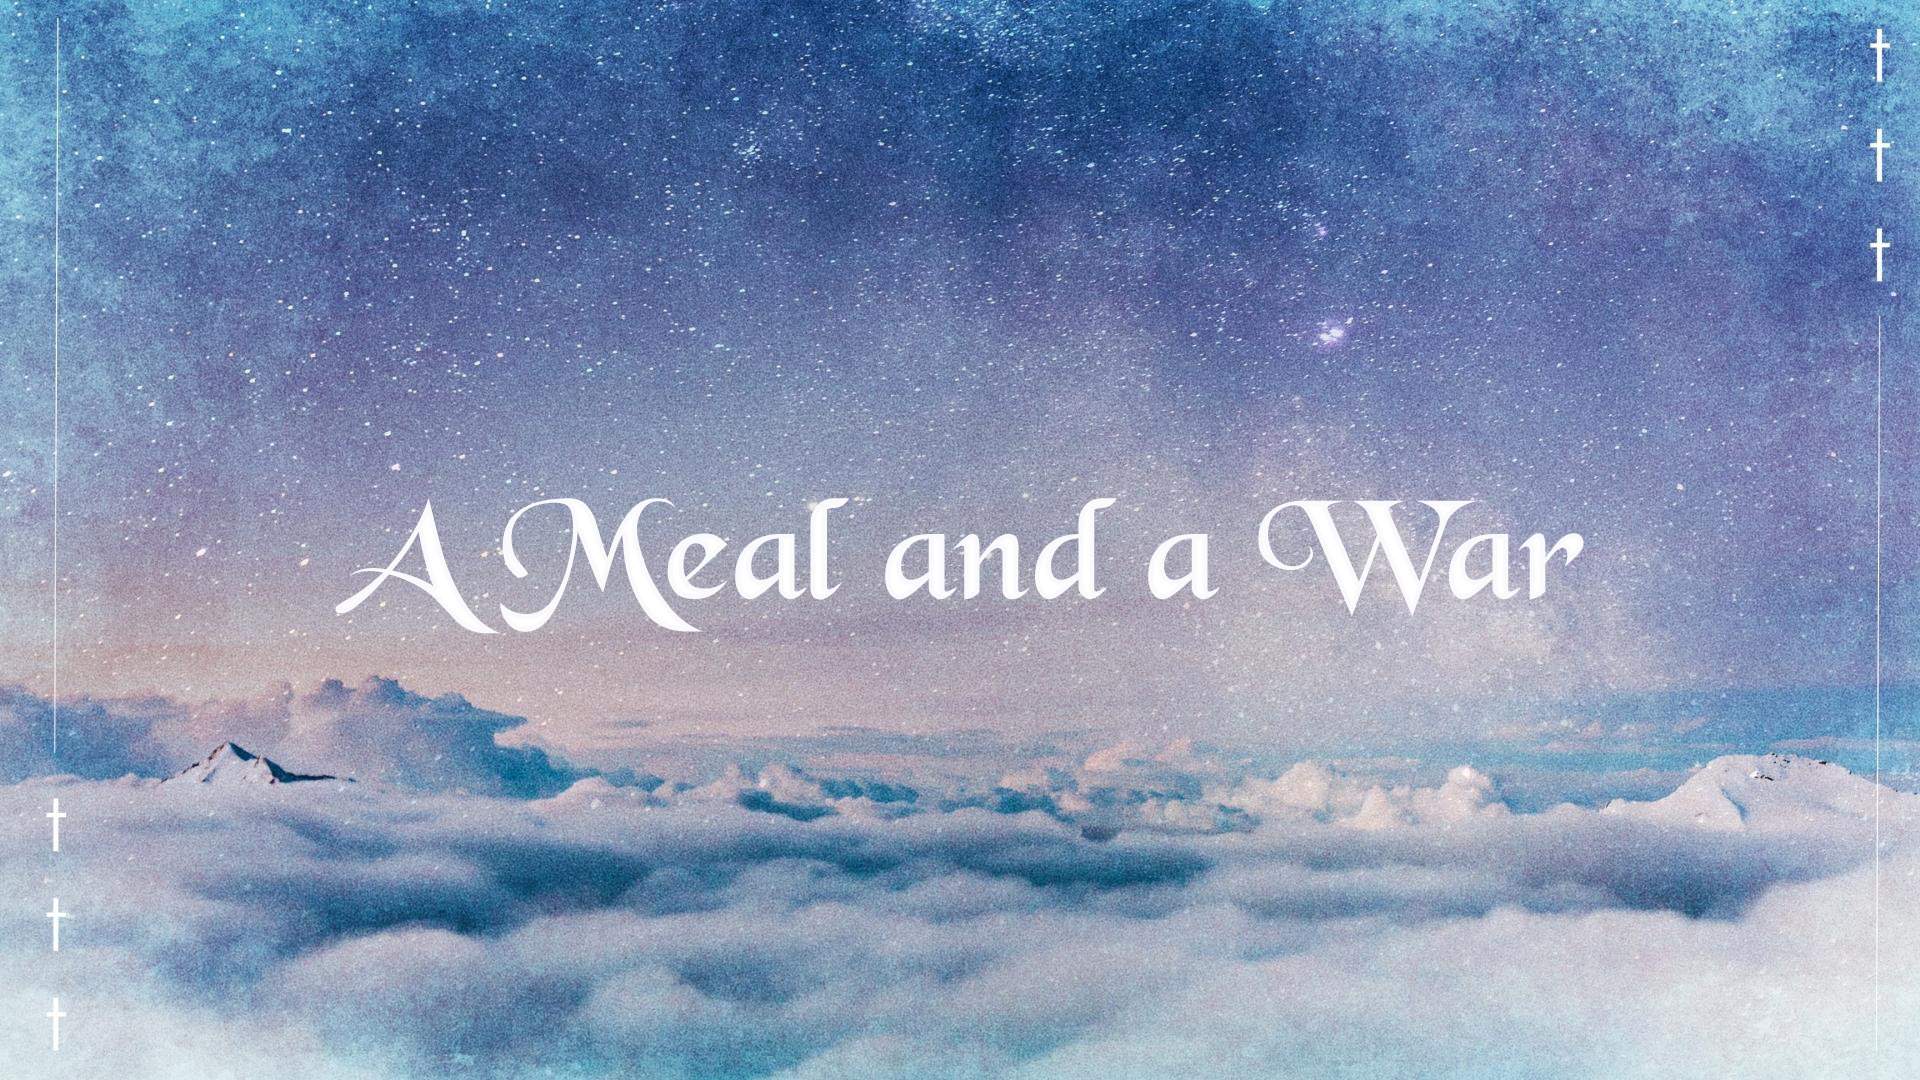 A Meal and a War